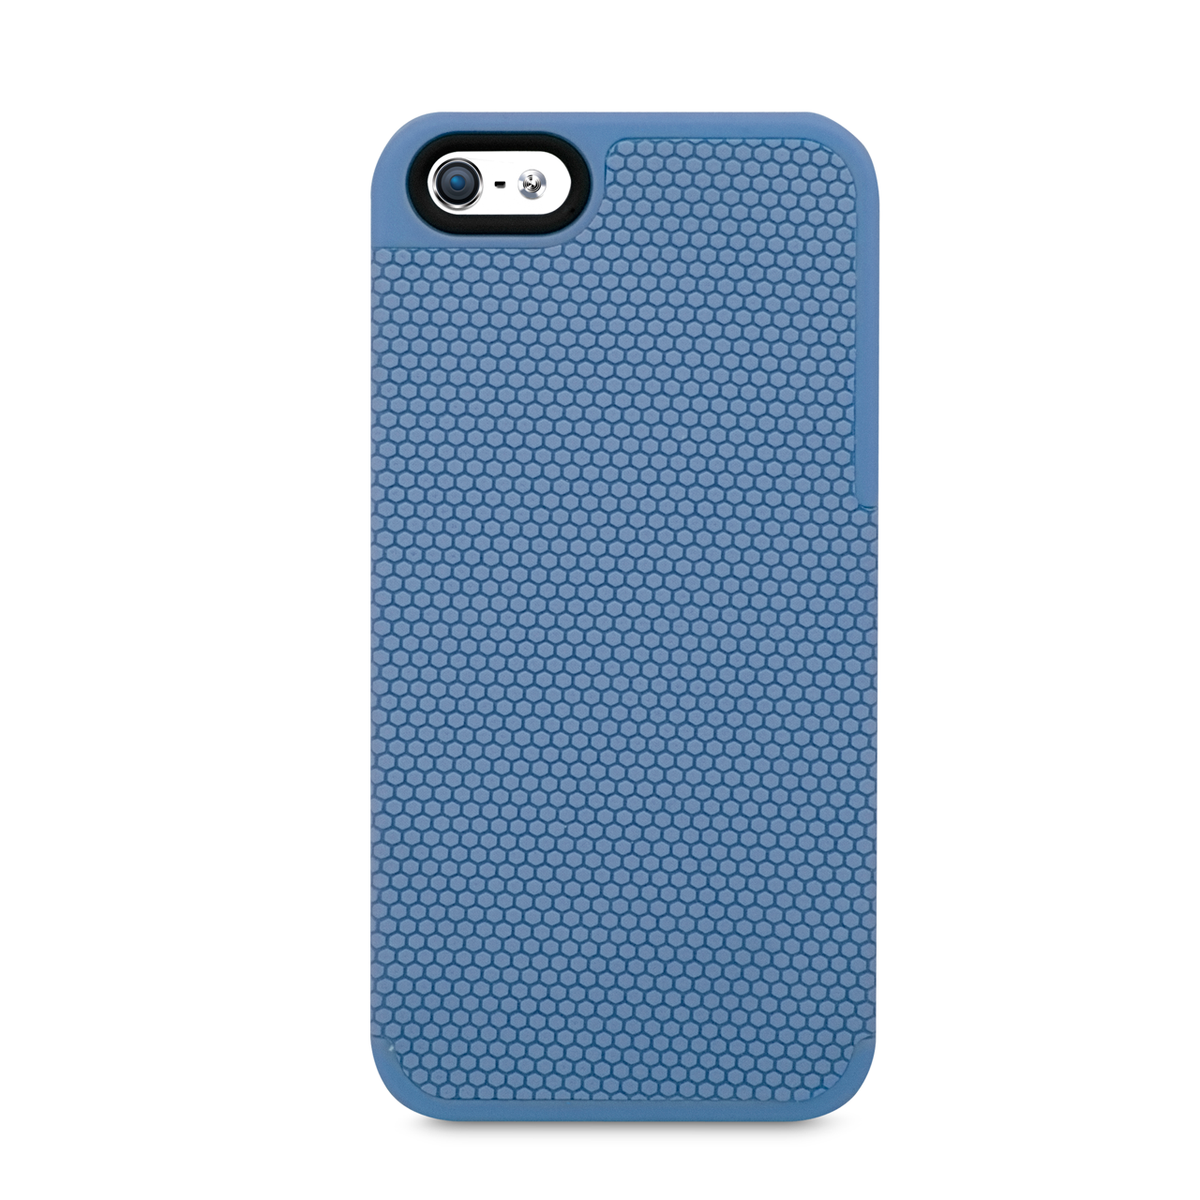 Honeycomb Case for iPhone 5 / 5s - iSound